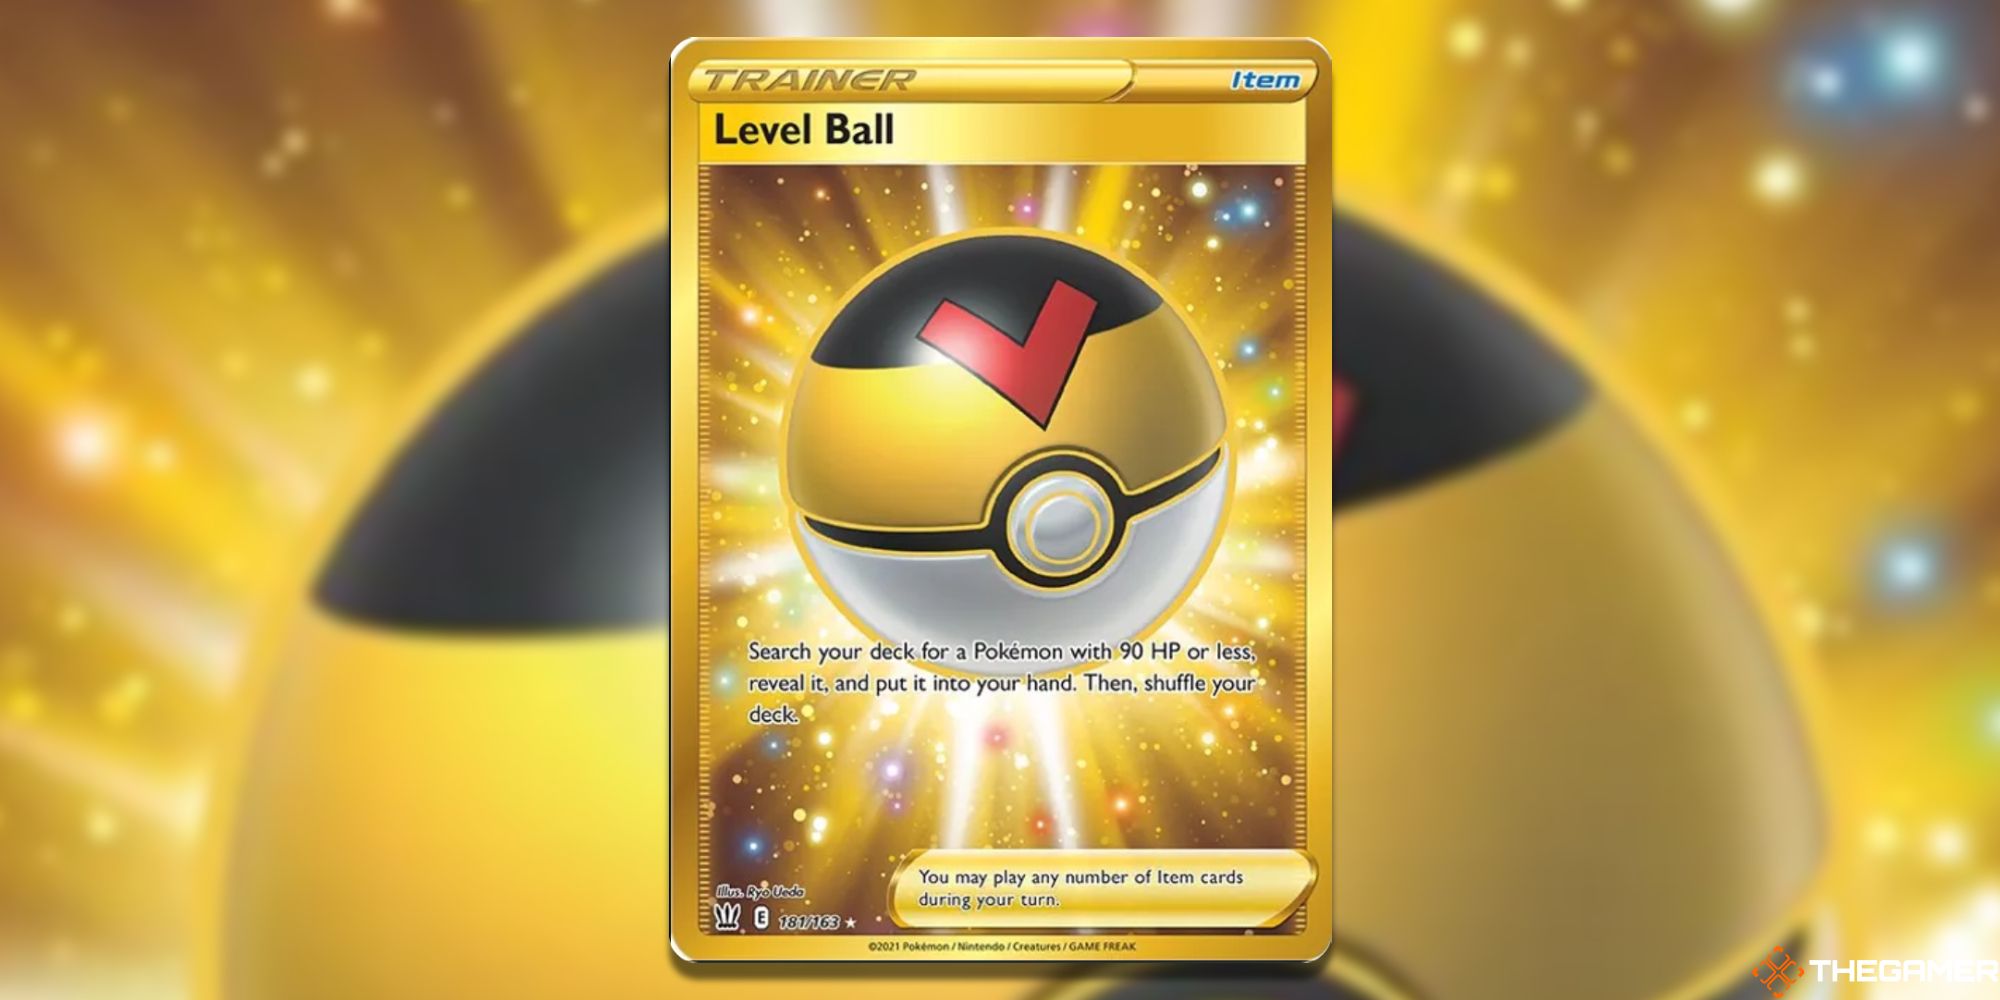 Pokemon TCG: Level Ball (Secret) from Battle Styles, with blurry background